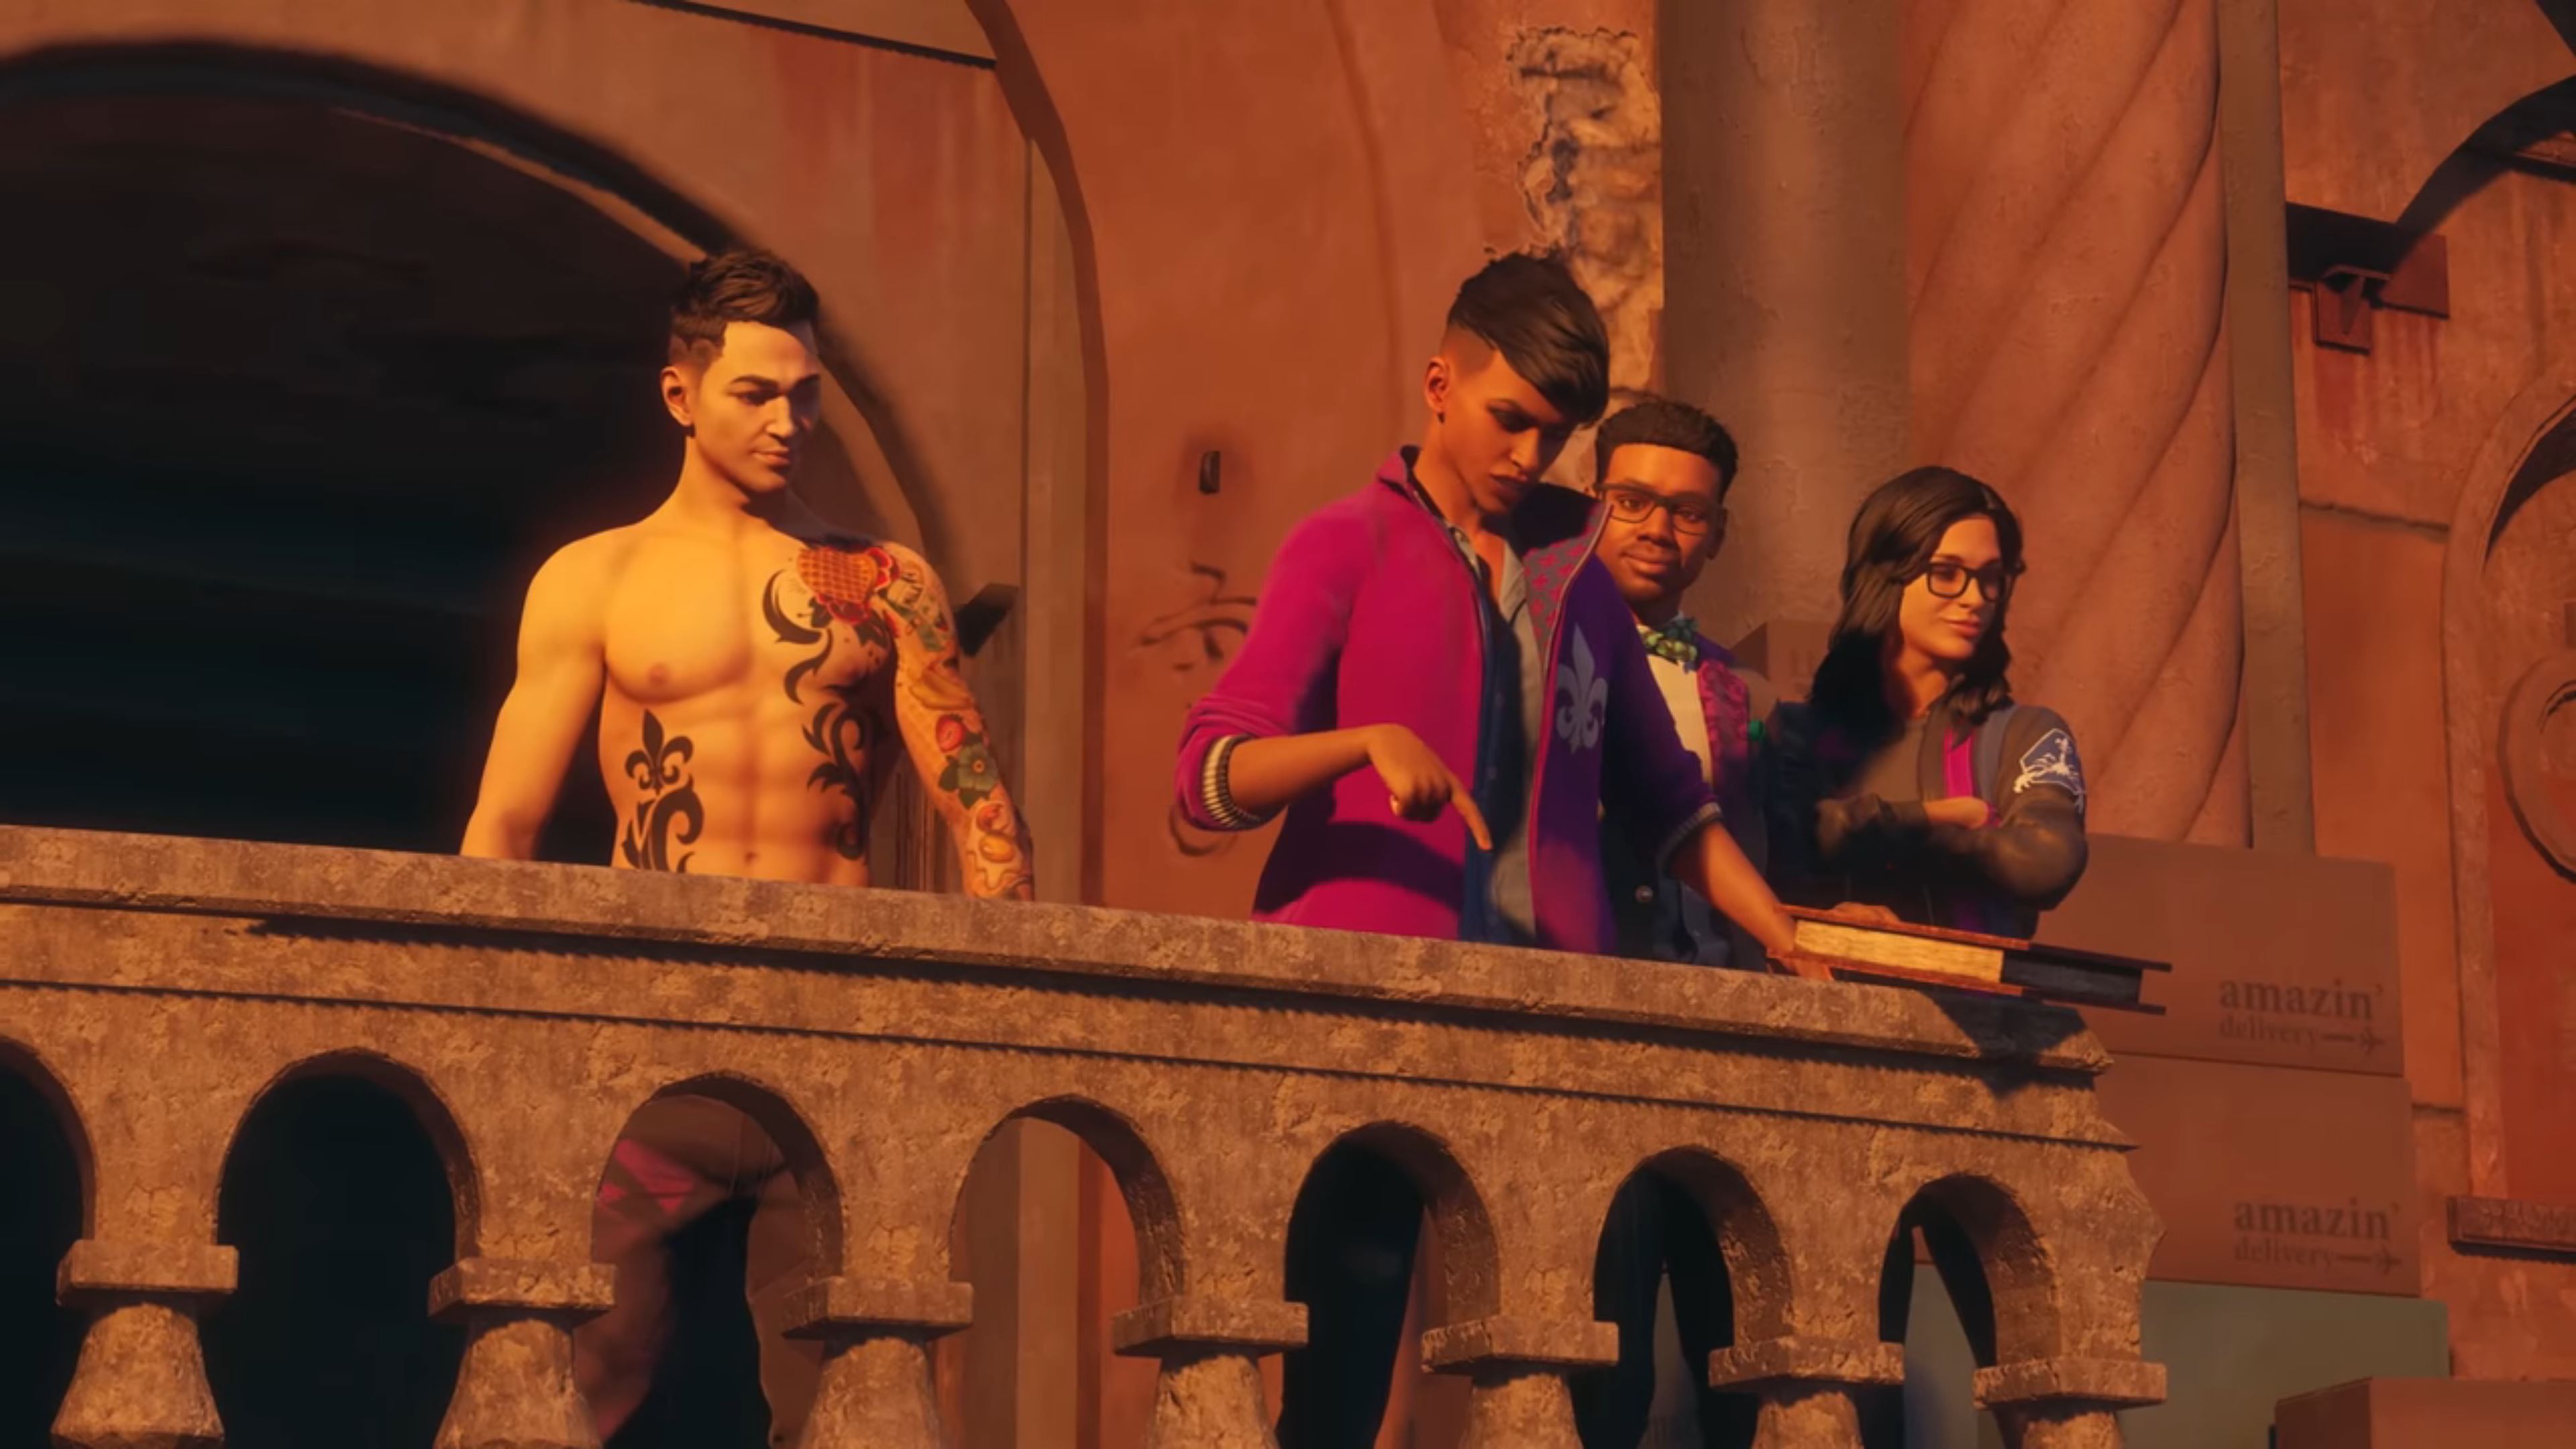 Saints Row: How to Unlock and Play Co-Op